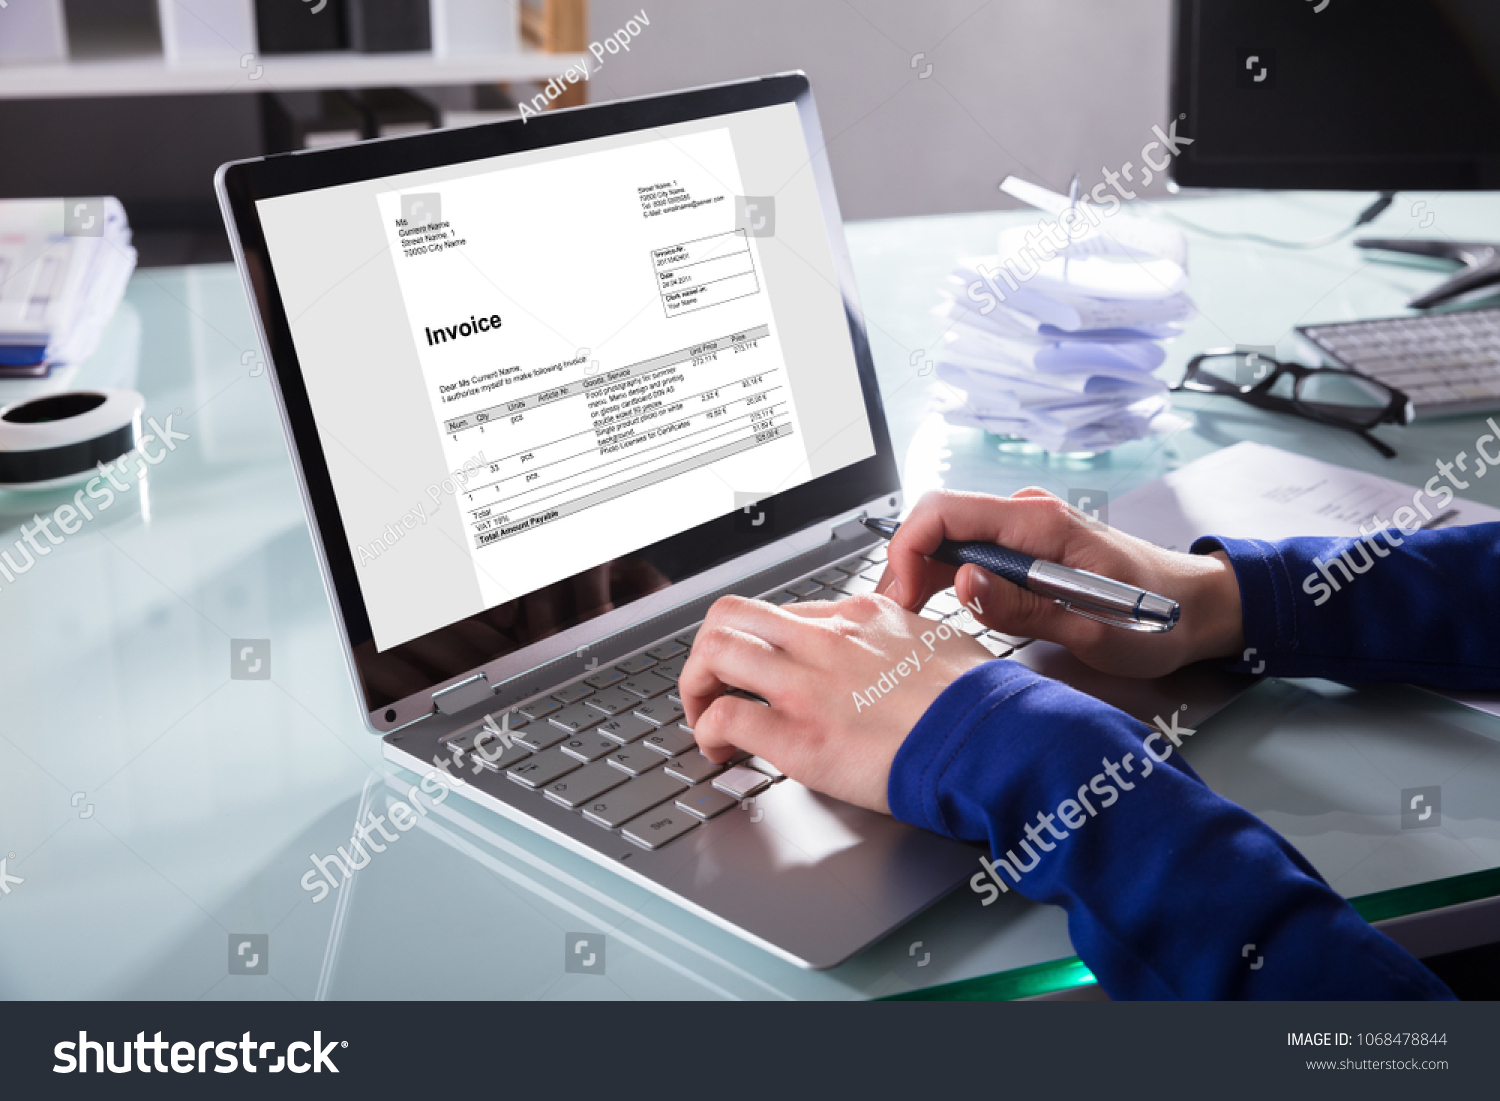 Close-up Of A Businessperson's Hand Analyzing Invoice On Laptop At Workplace #1068478844